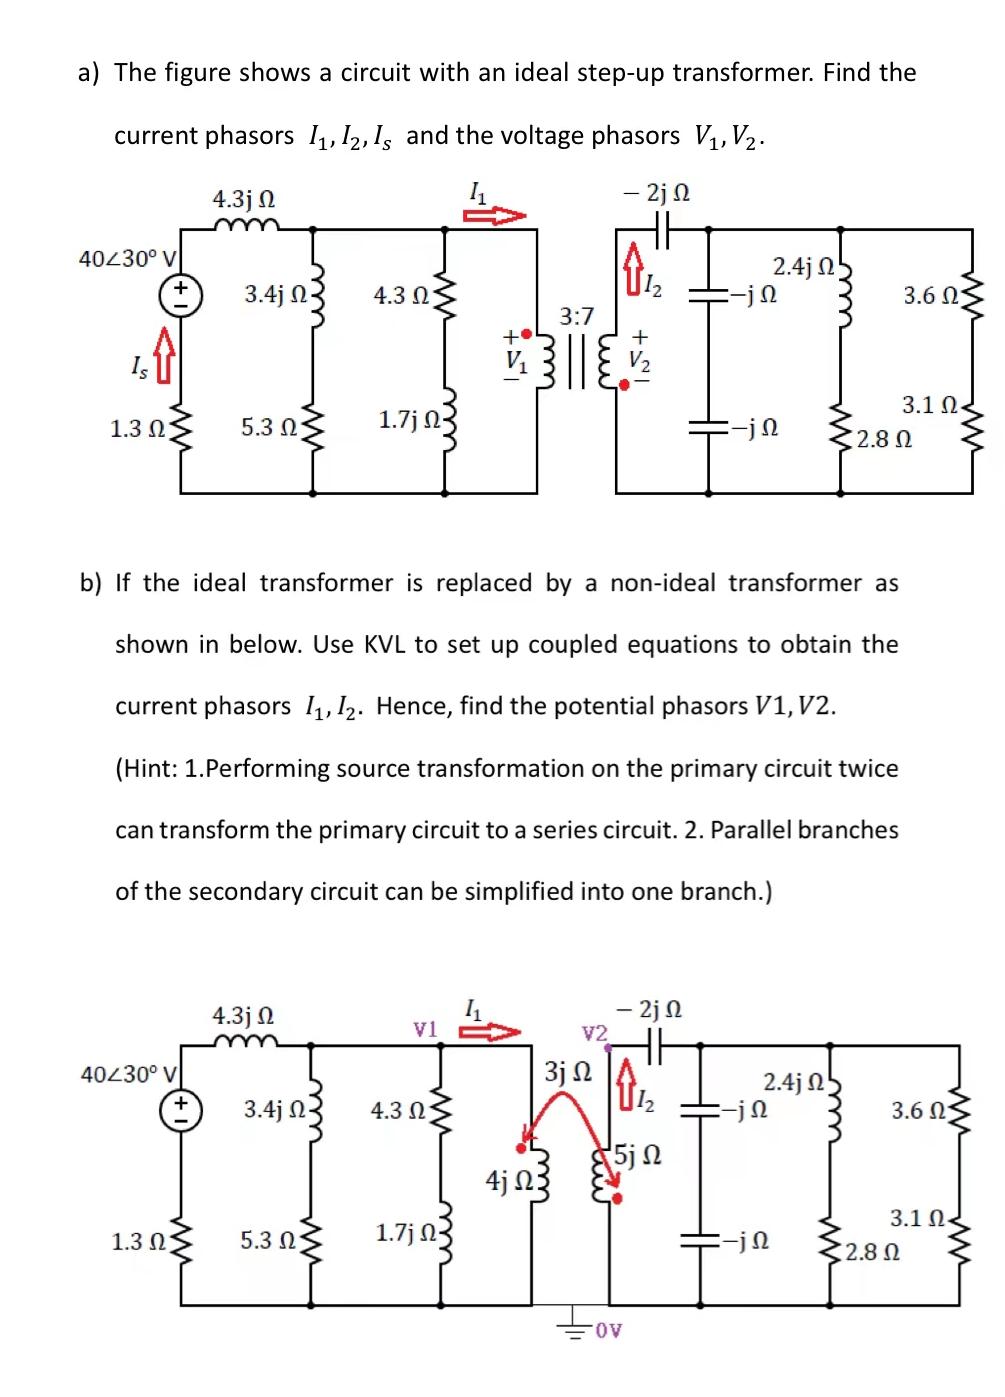 a) The figure shows a circuit with an ideal step-up transformer. Find the current phasors I, I2, Is and the